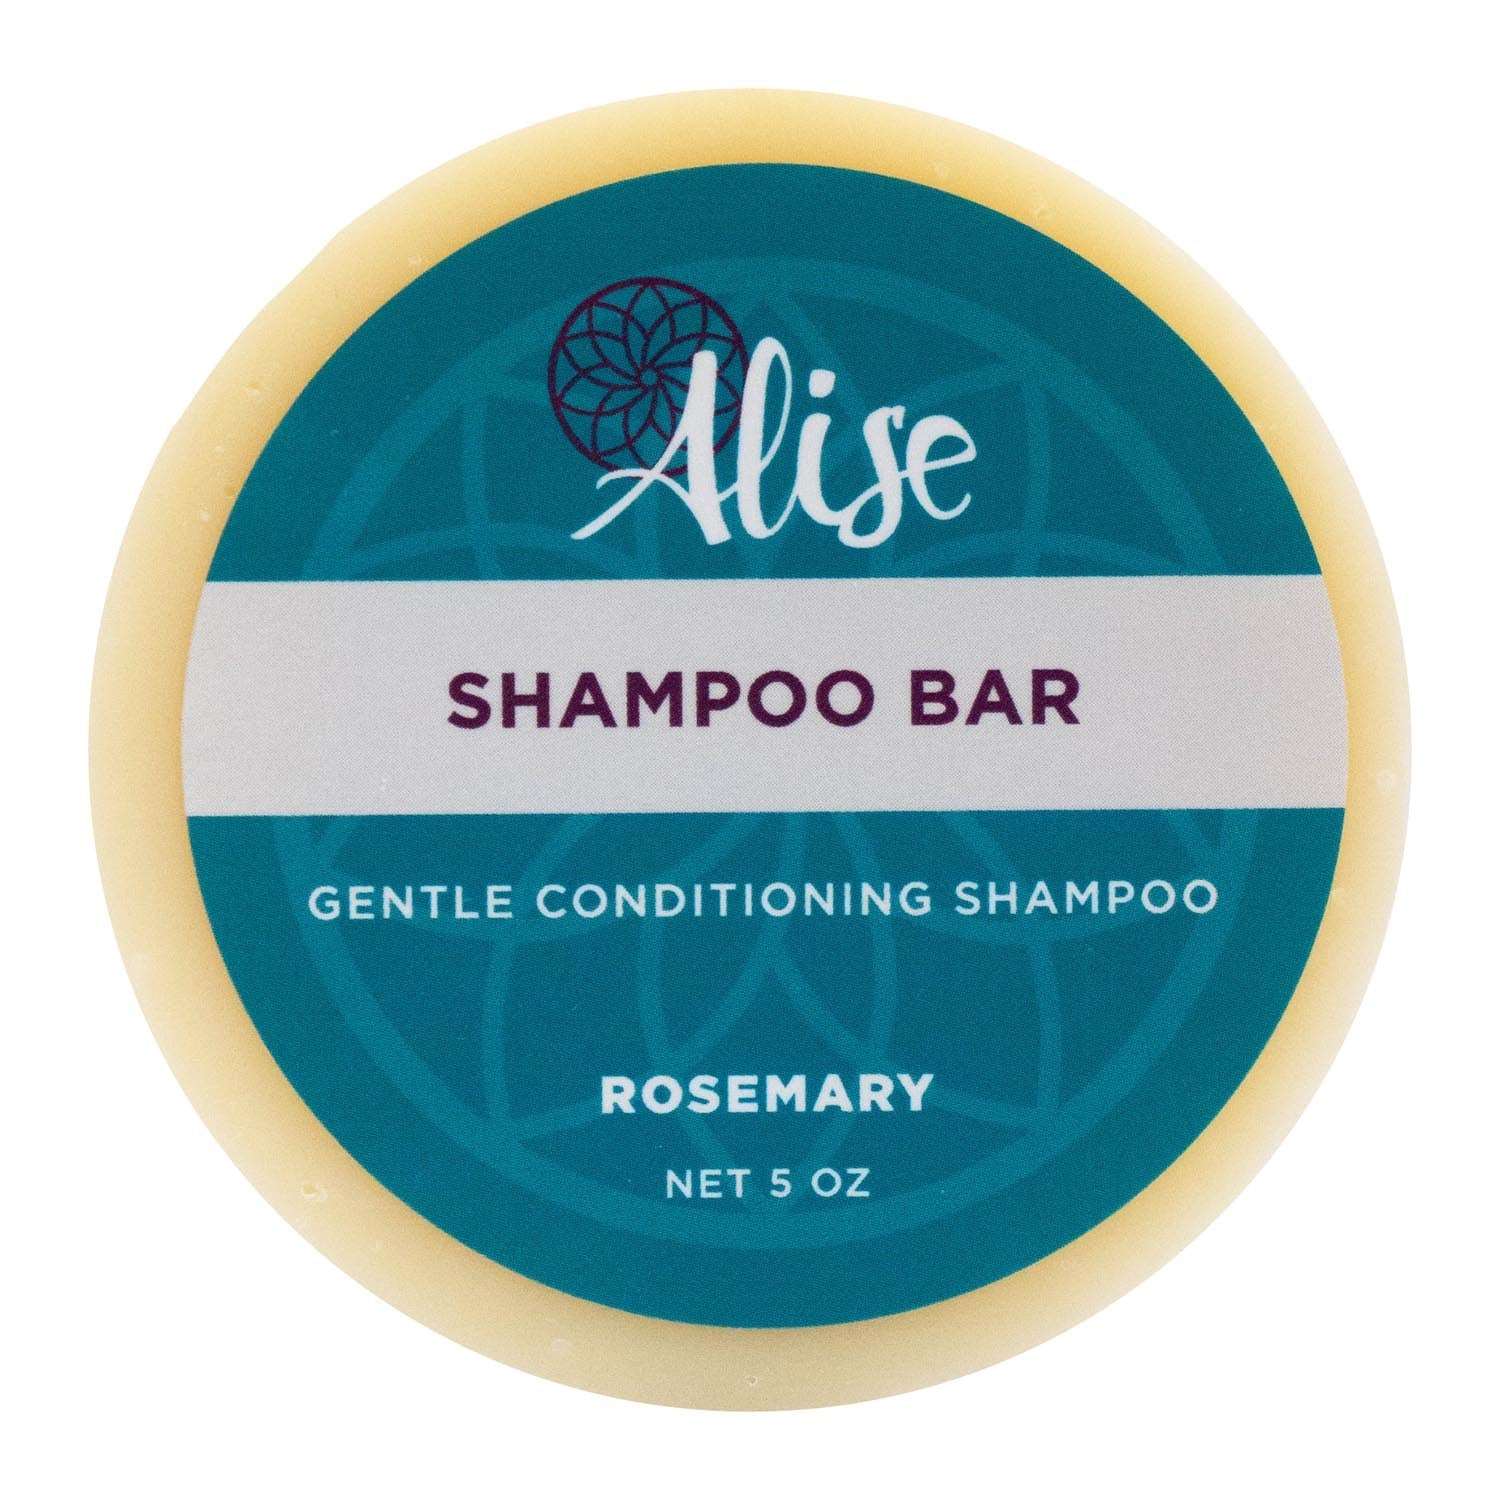 Shampoo Bar 5oz handcrafted by Alise Body Care